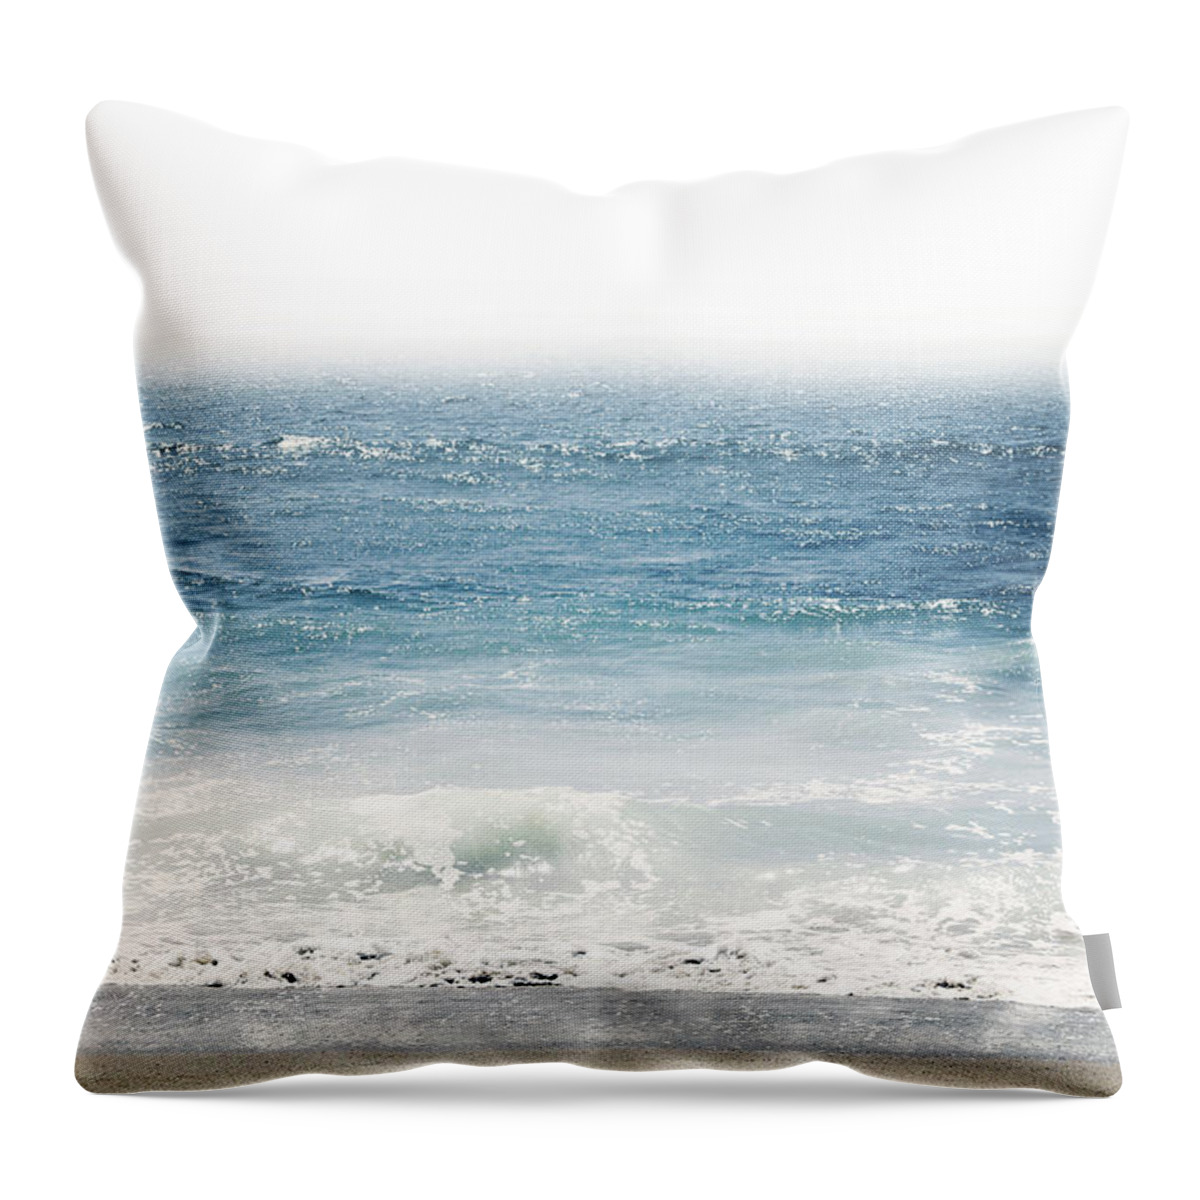 Ocean Throw Pillow featuring the photograph Ocean Dreams- Art by Linda Woods by Linda Woods